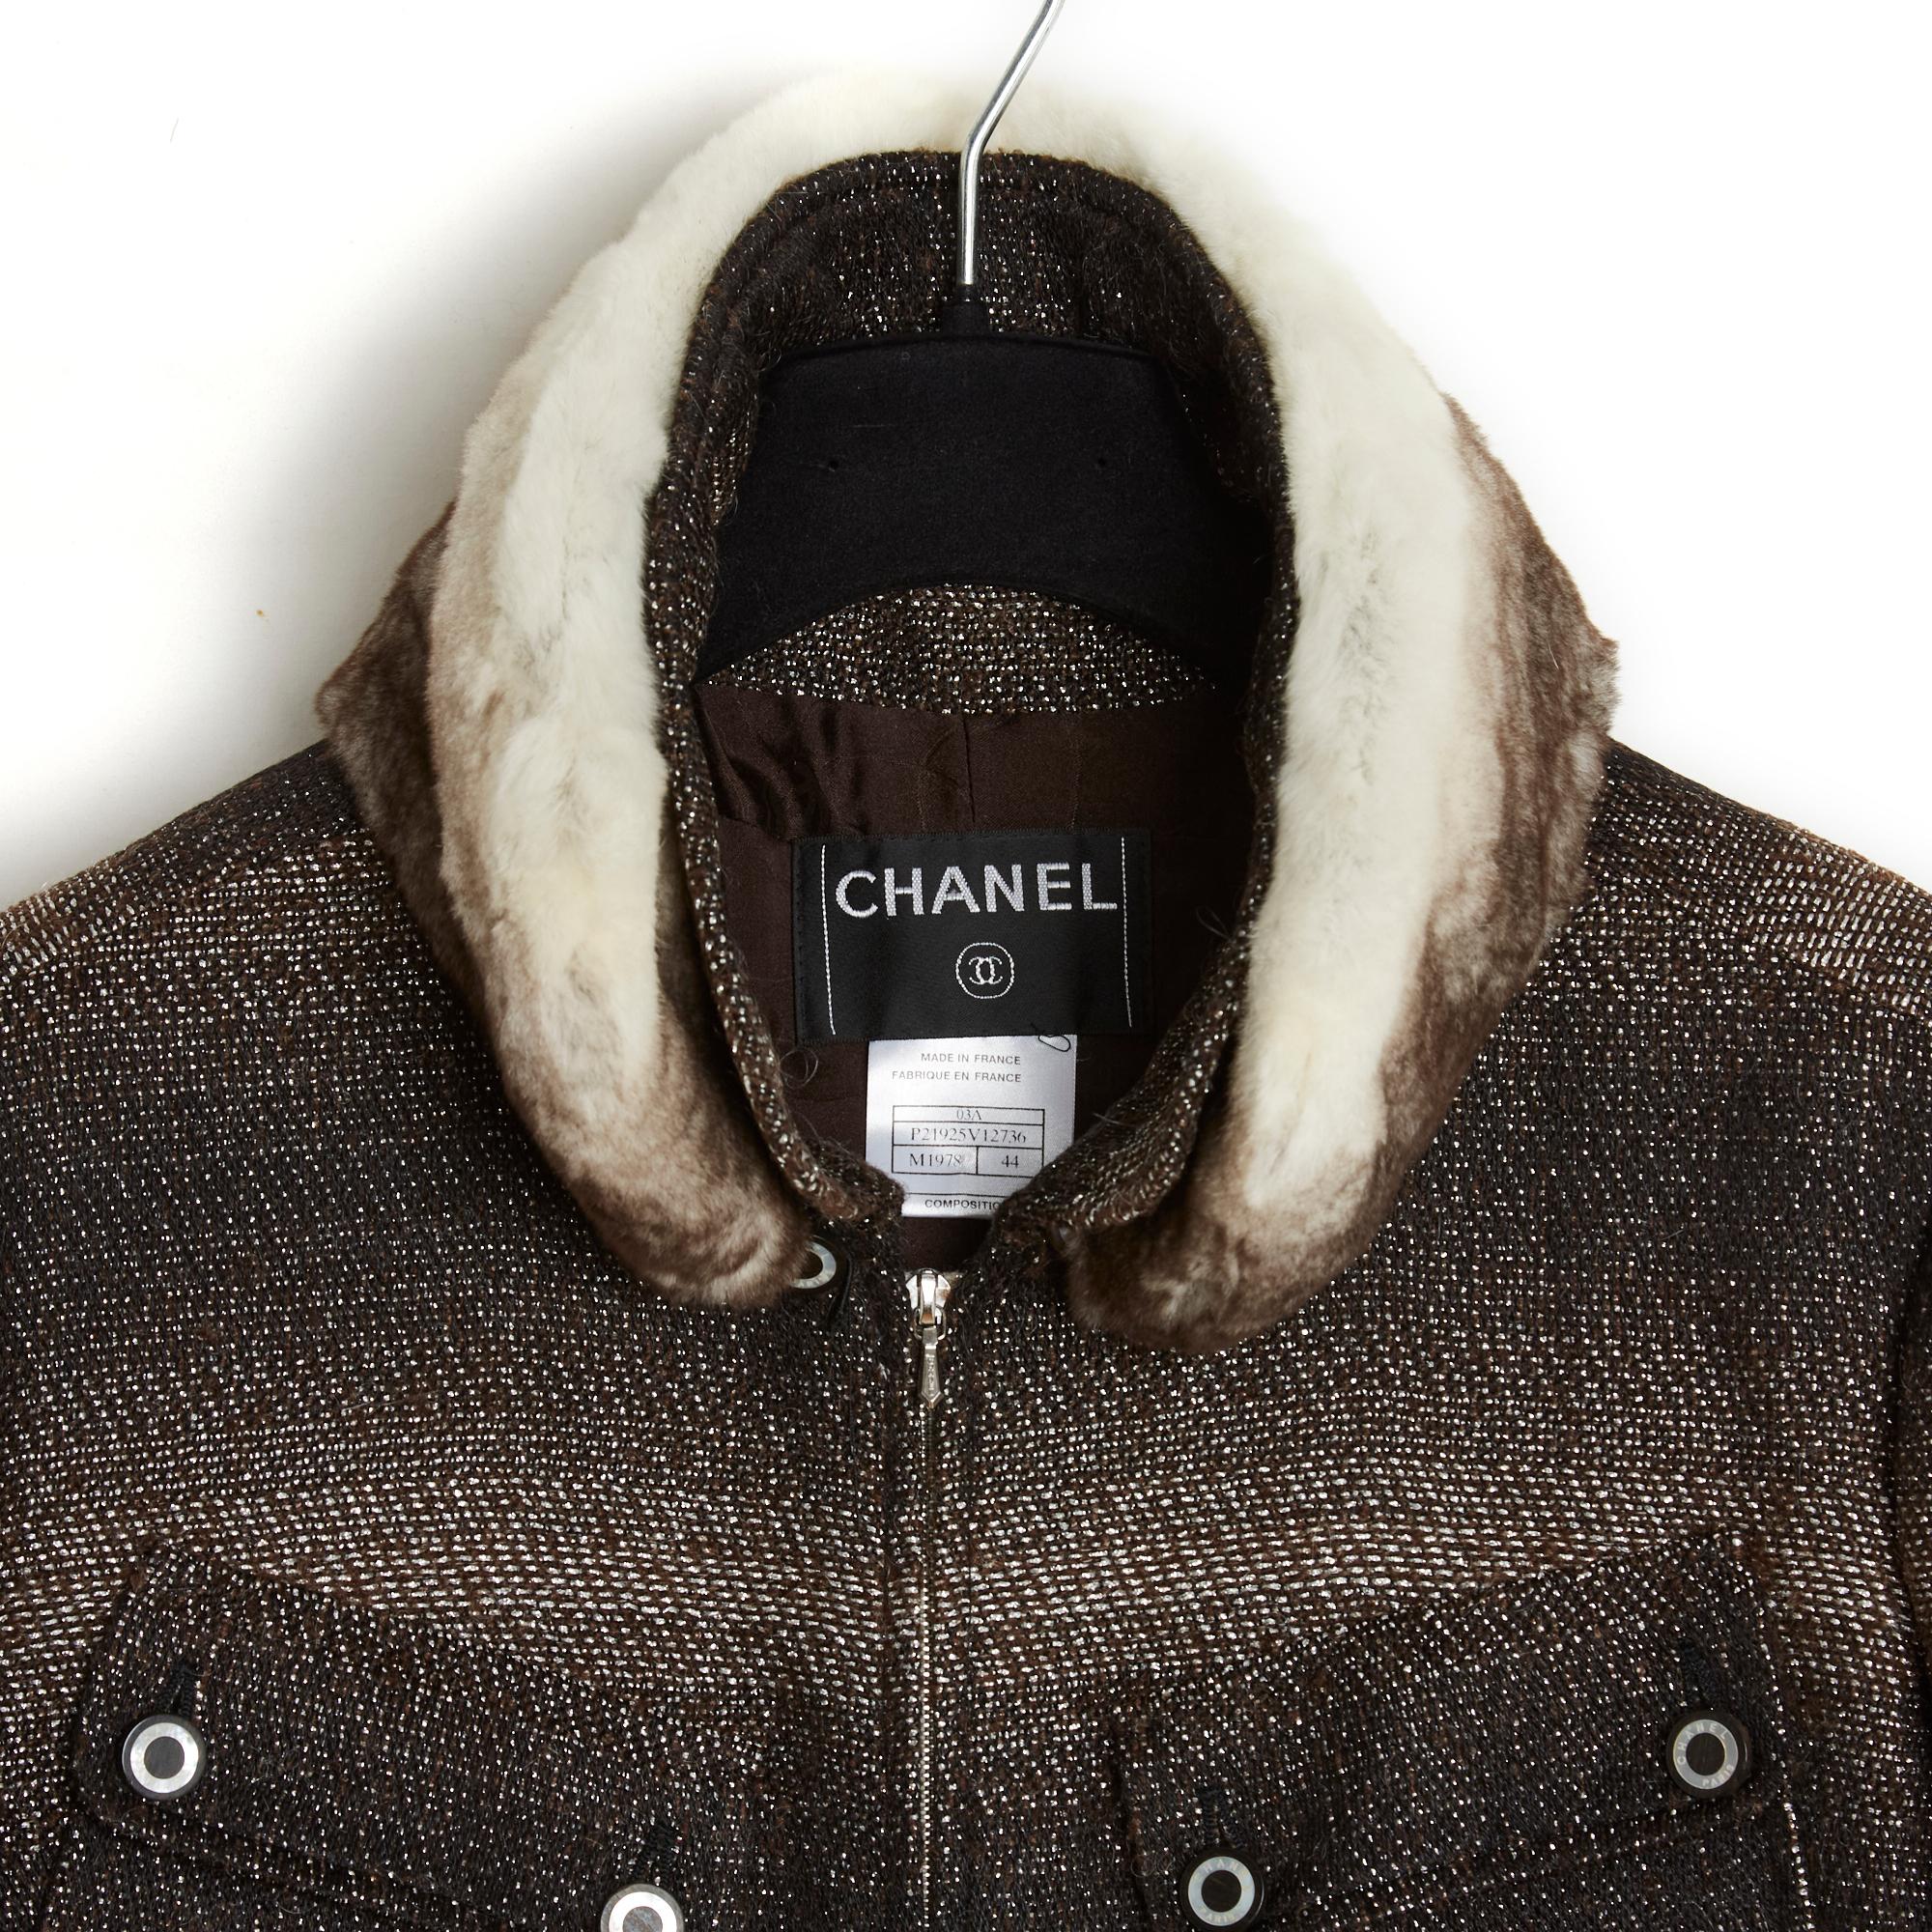 Chanel jacket or jacket from the AW2003 collection in mixed polyamide mat in silver, brown and black tones, rounded collar closed with a long front zip, with a removable fur collar held in place by 7 buttons in the neck, 4 patch pockets including 2